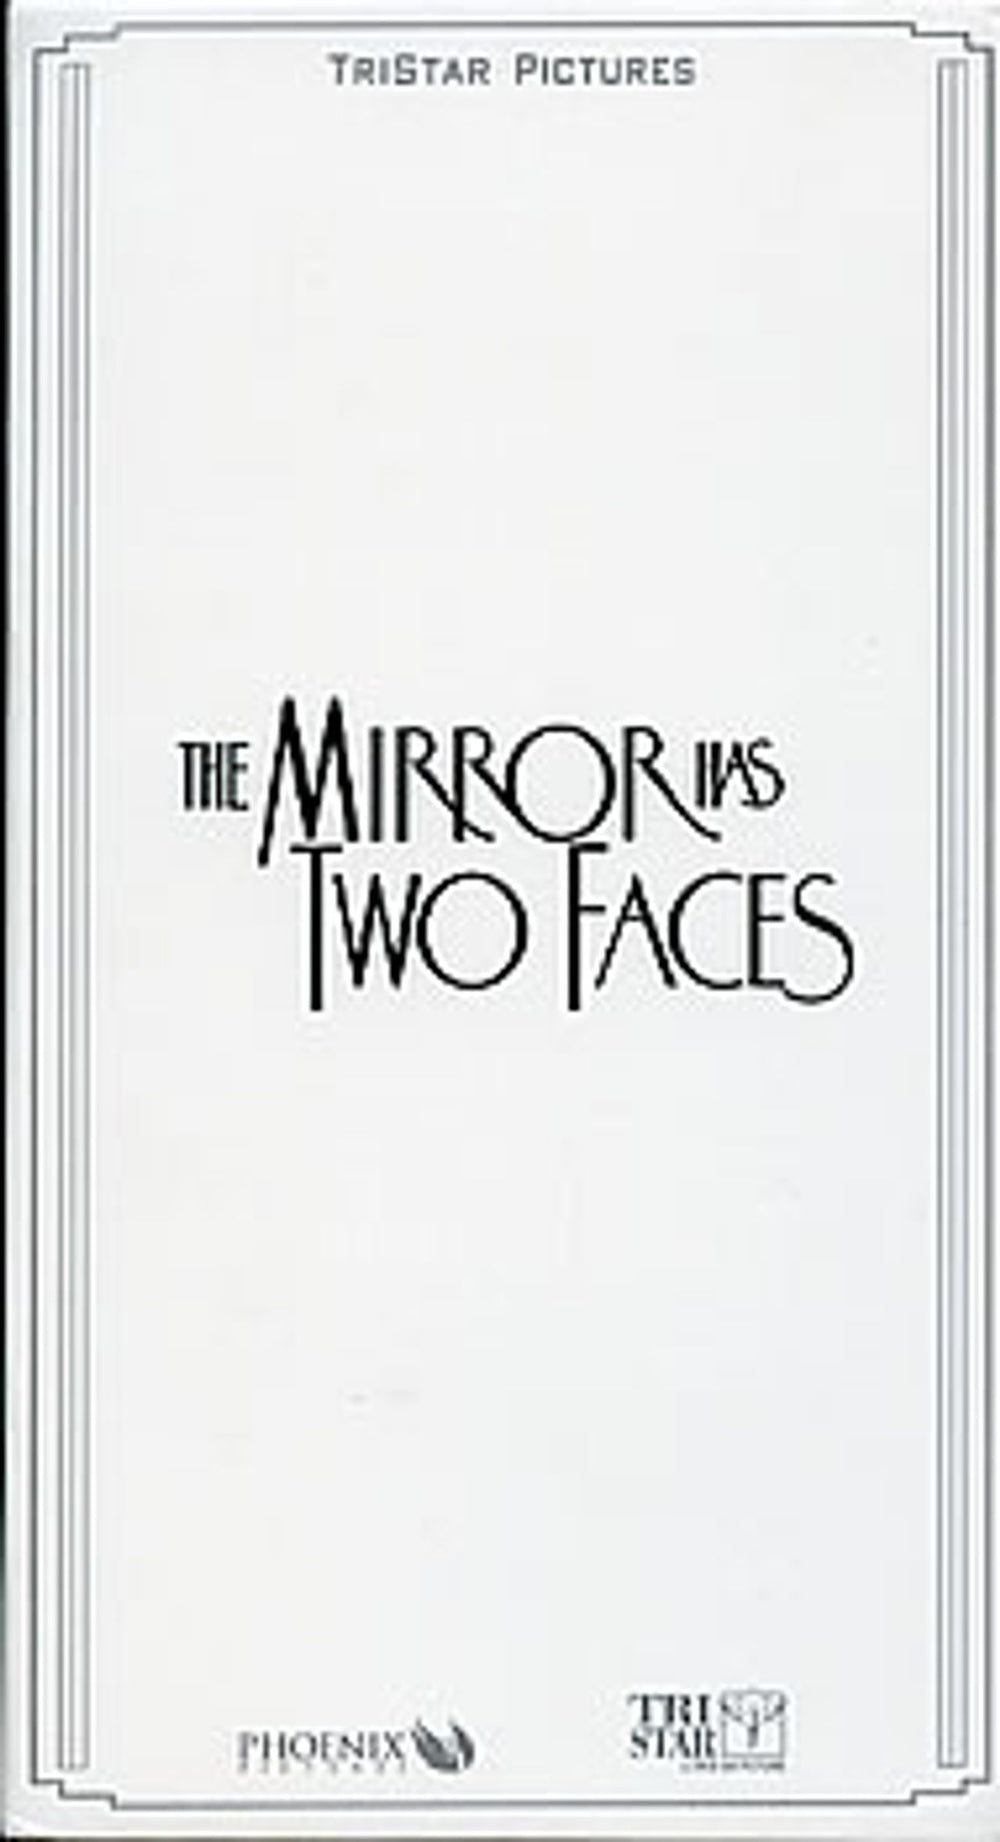 Barbra Streisand The Mirror Has Two Faces US Promo video (VHS or PAL or NTSC)